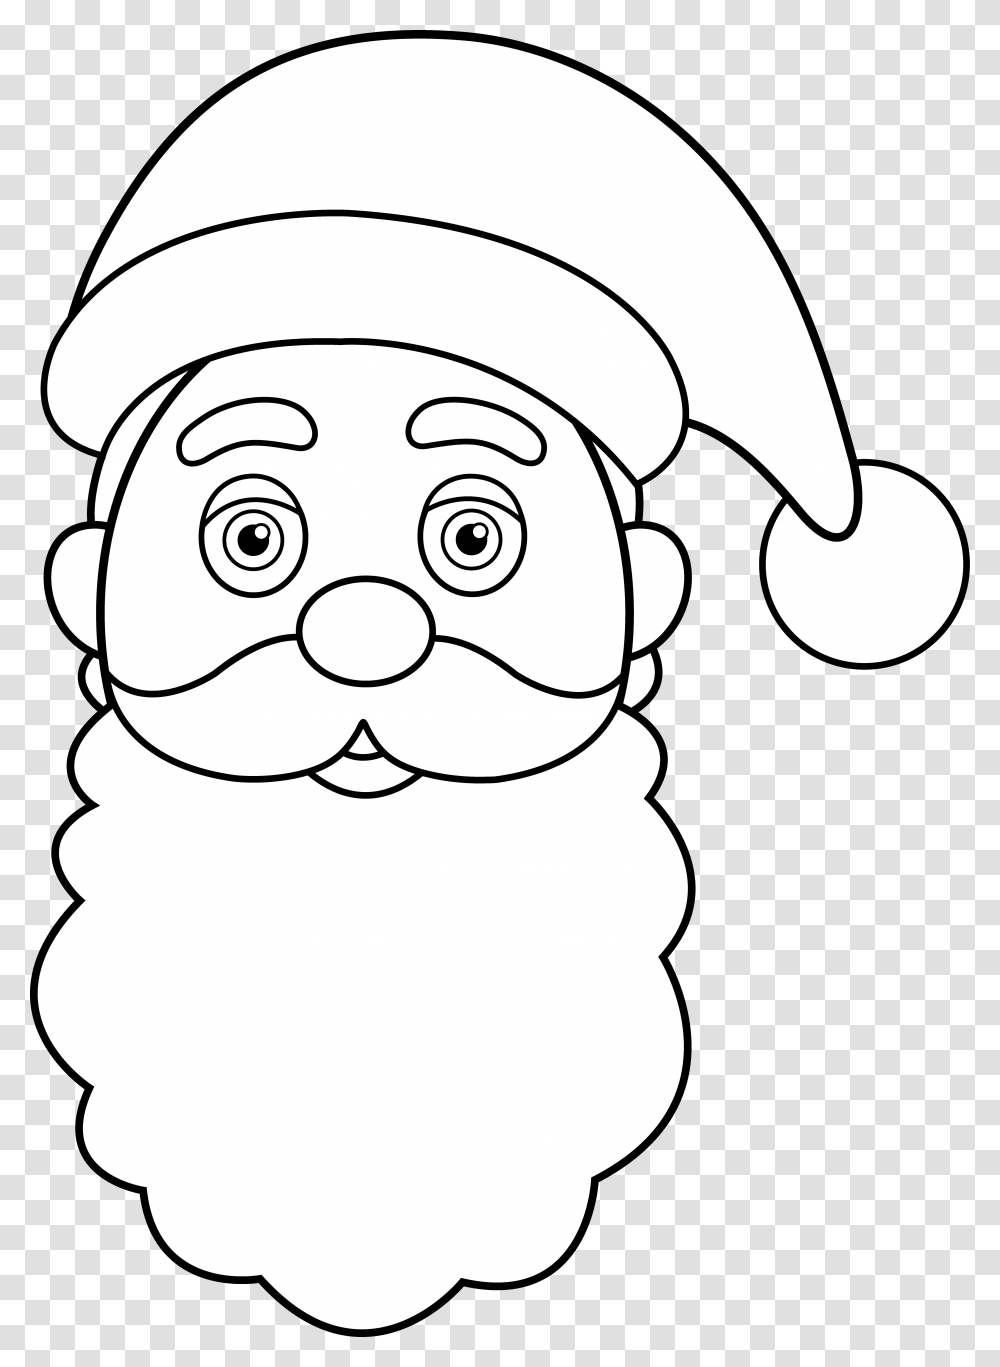 Whitefaceline Artheadcartoonblack And Whitefictional Santa Claus Face, Drawing, Stencil, Sketch, Doodle Transparent Png